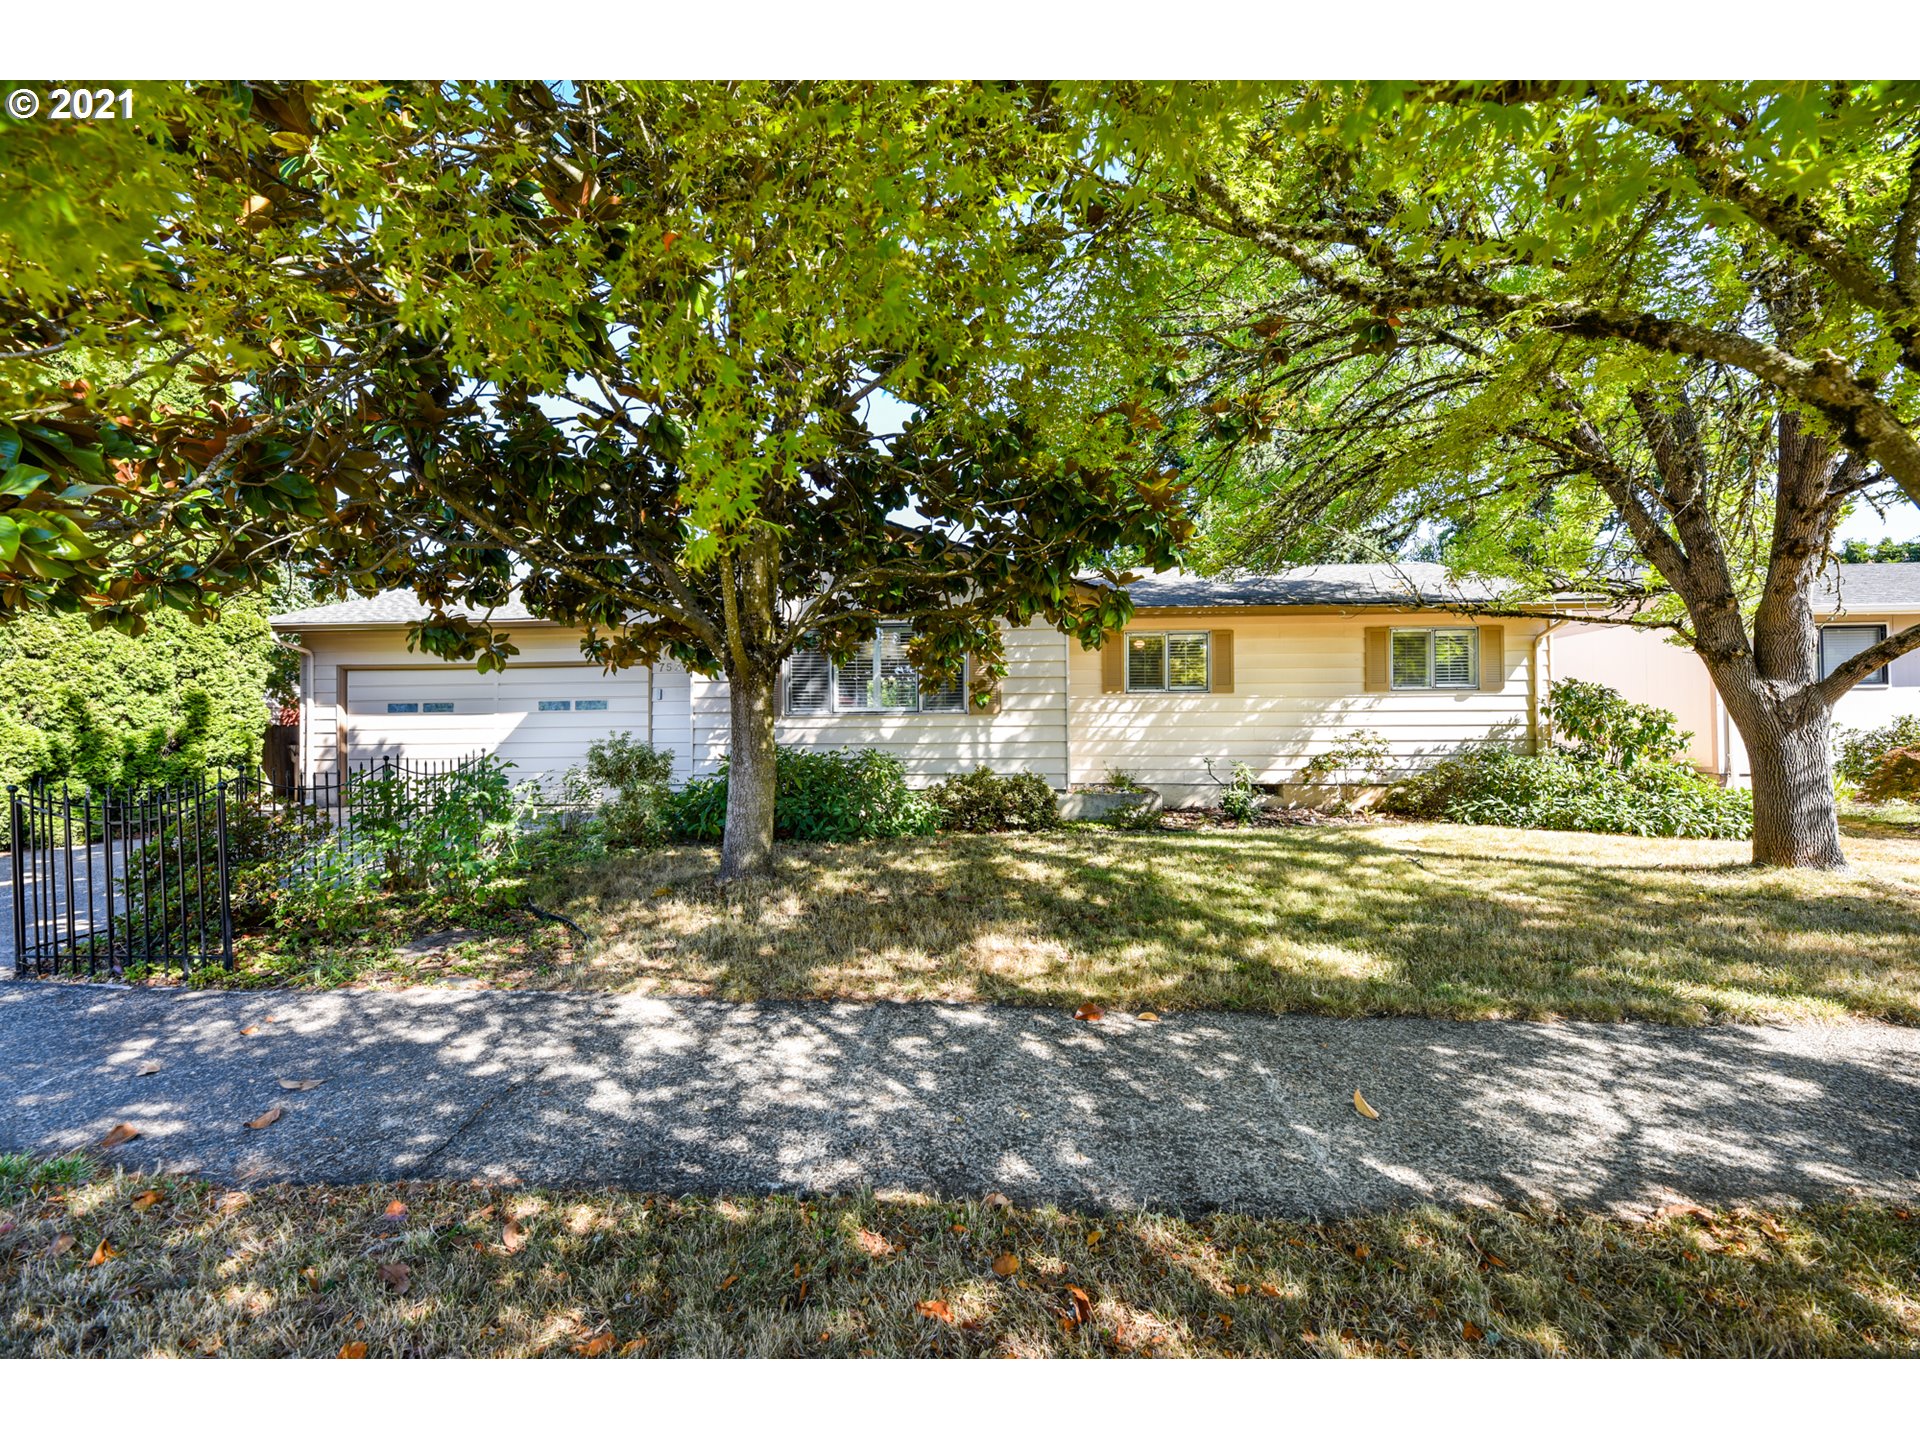 753 HATTON AVE (1 of 32)